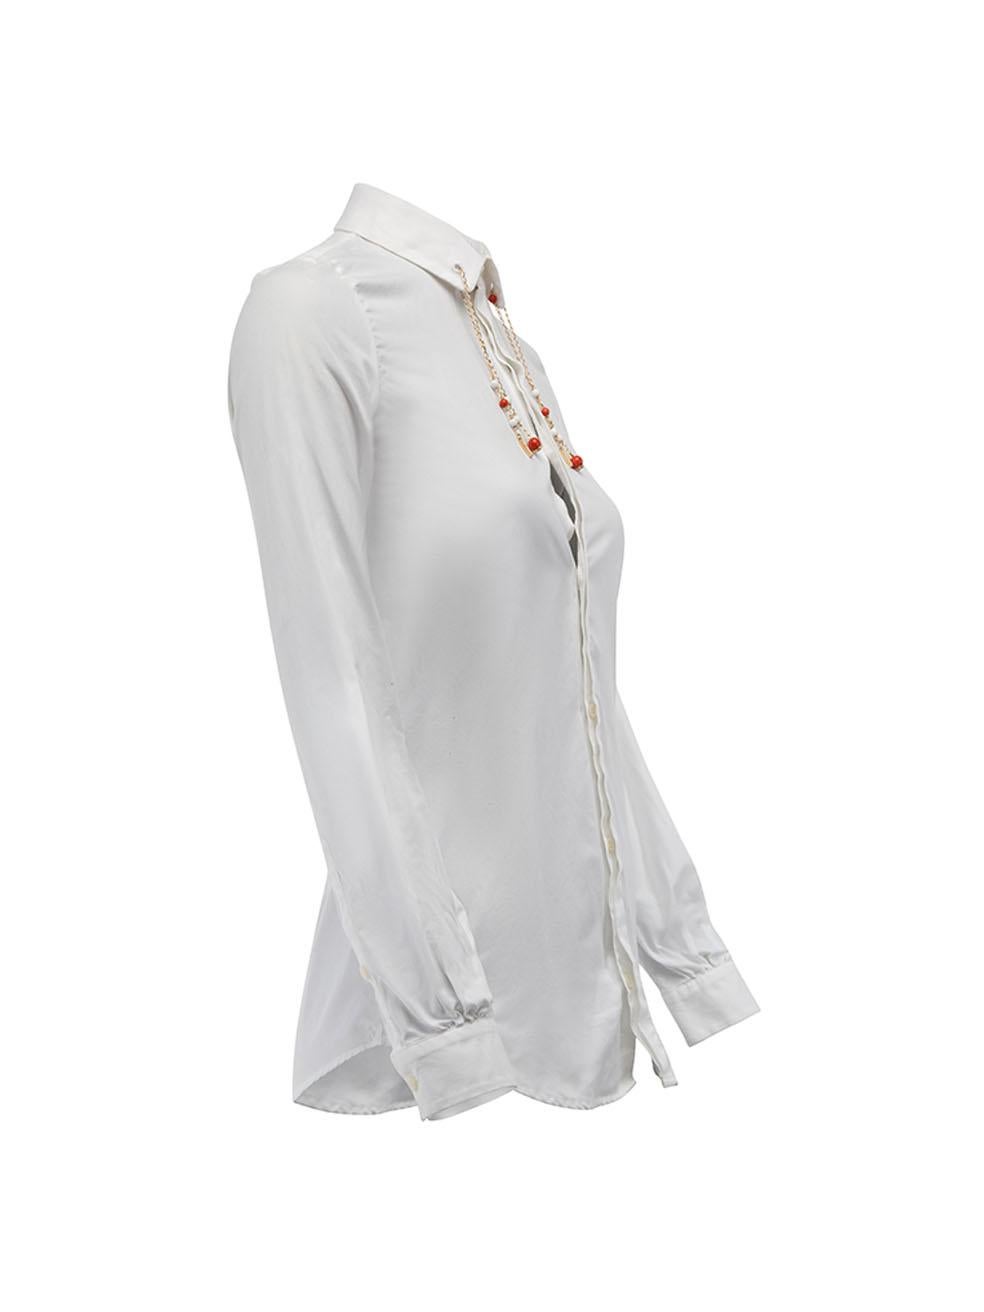 CONDITION is Very good. Hardly any visible wear to top is evident on this used Dsquared2 designer resale item. Details White Cotton Long sleeves shirt Buttoned cuffs Front button up closure Beaded chain detail Made in Italy Composition NO